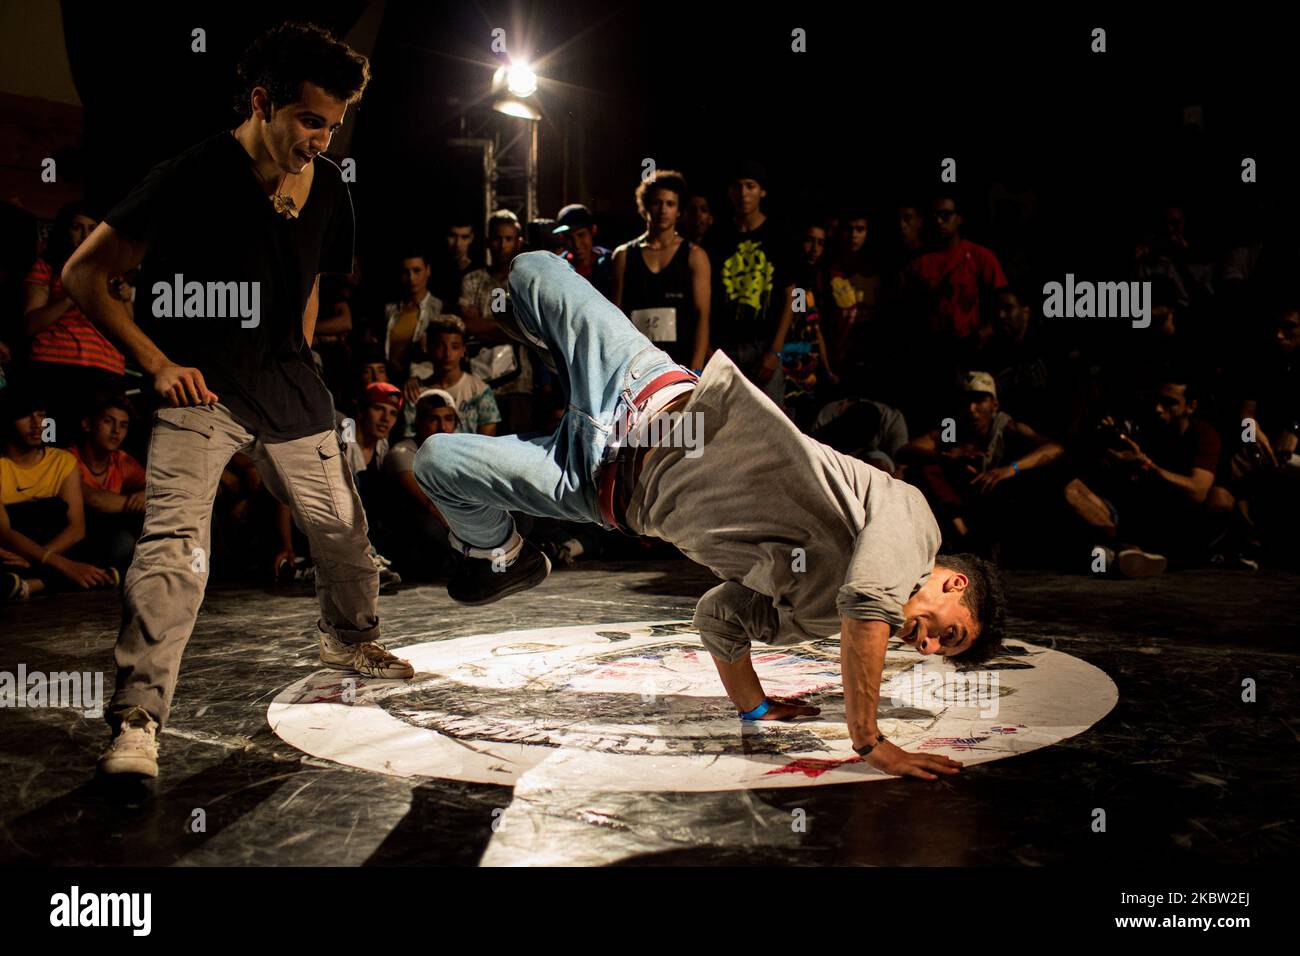 Tunis, Tunisia, 15 May 2015. Two young b boys during a breakdance competition in downtown Tunis. (Photo by Emeric Fohlen/NurPhoto) Stock Photo